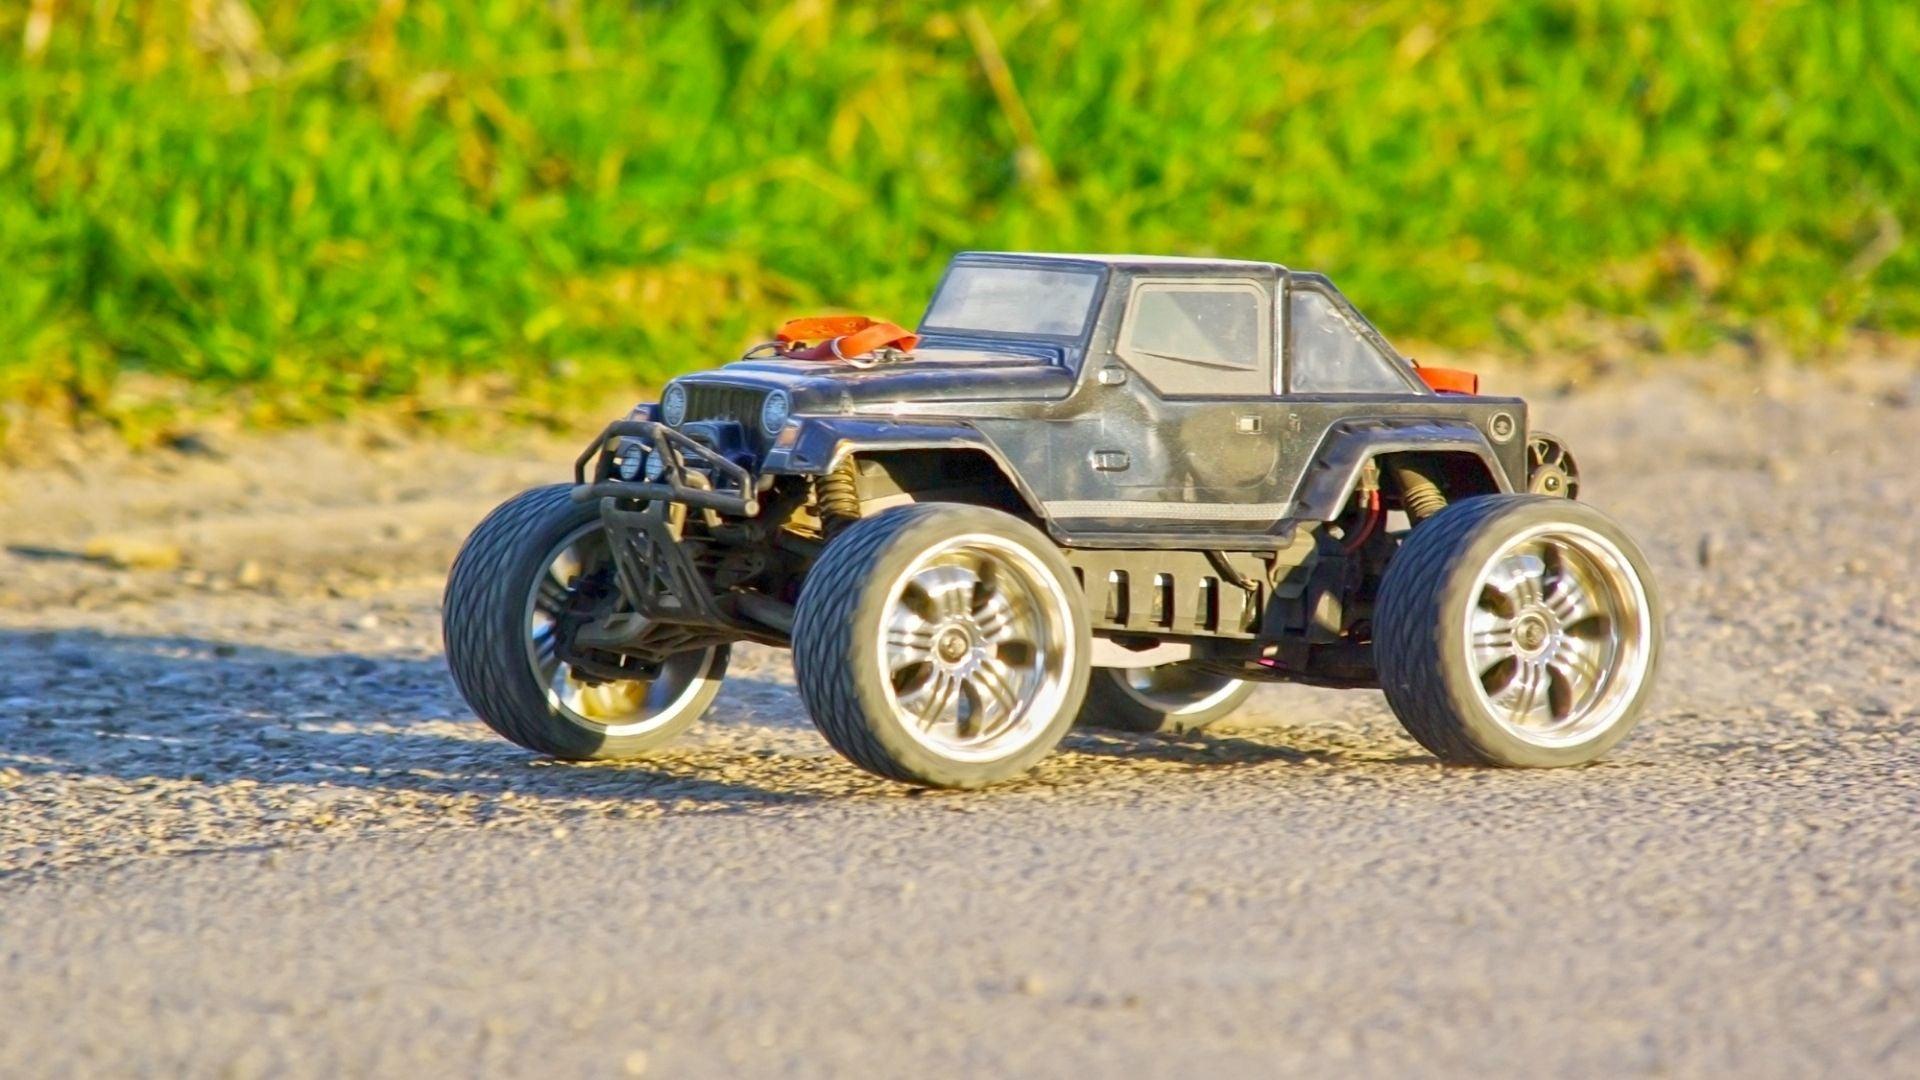 Best Remote Control Jeep: Factors to Consider When Buying a Remote Control Jeep